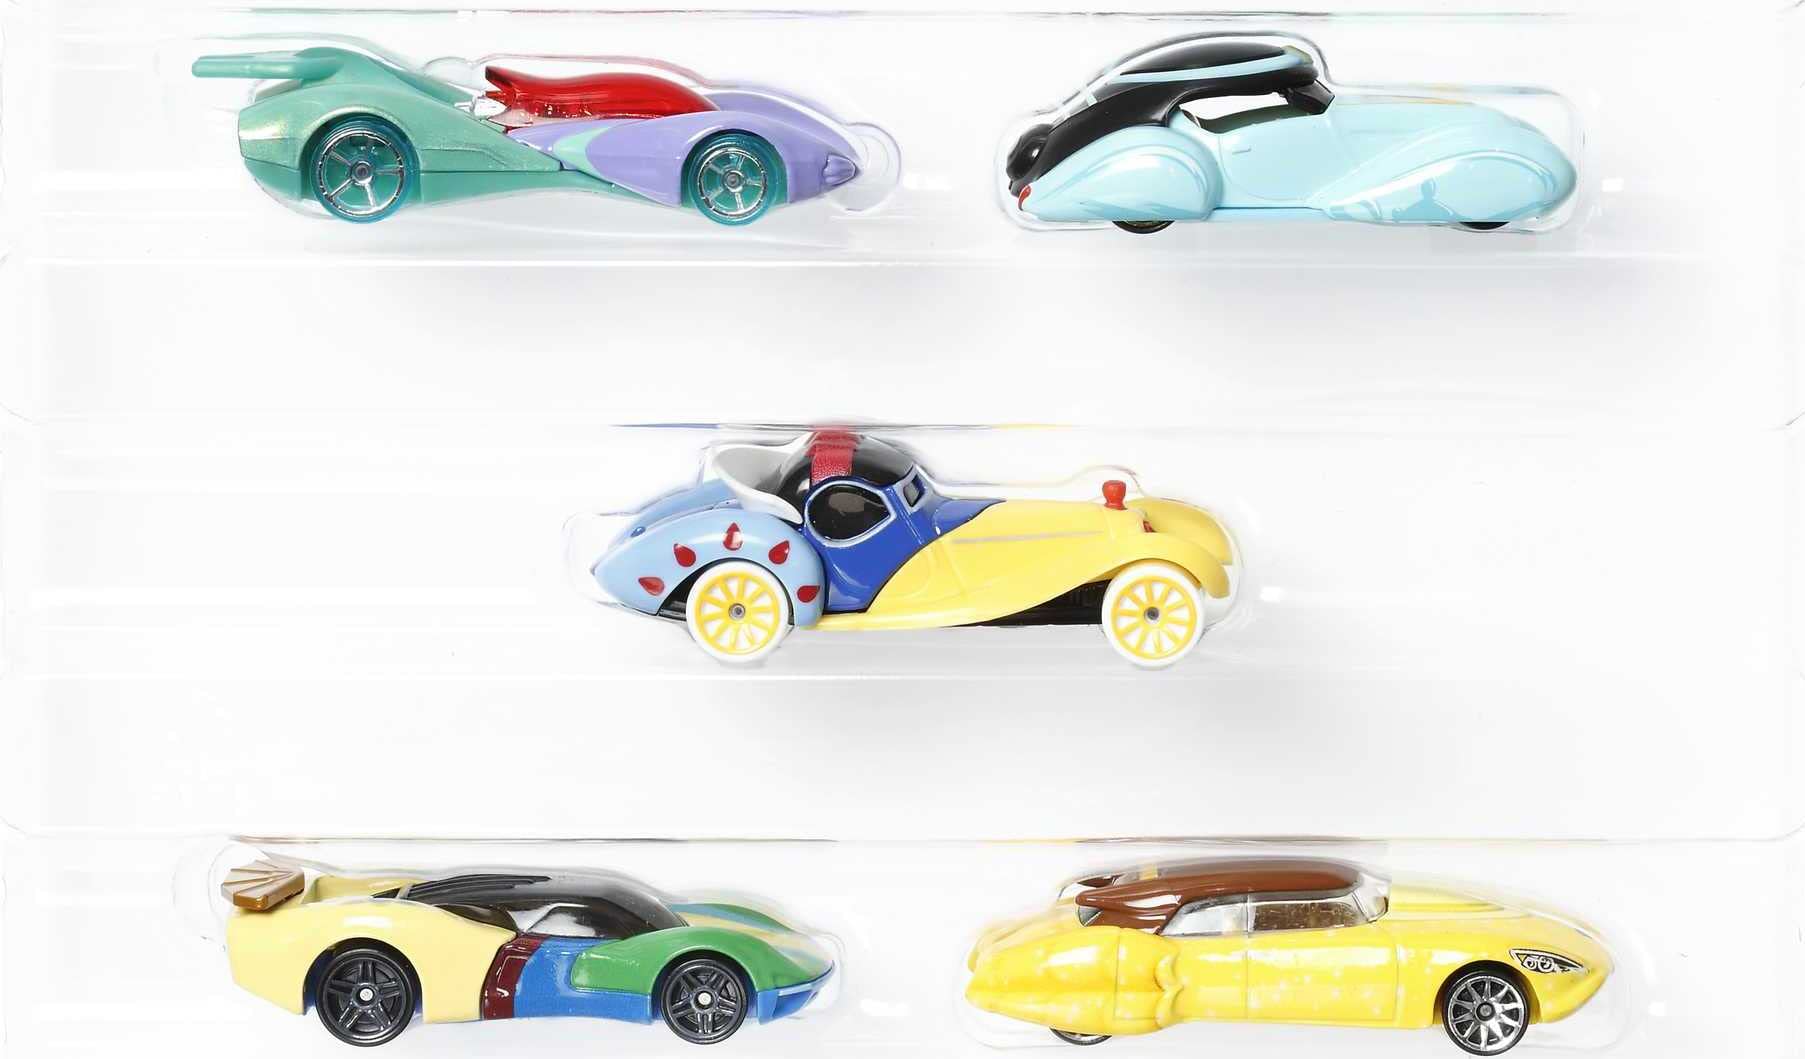 Hot Wheels Disney Princess Character Car 5-Pack, Bundle of Toy Cars Inspired by Disney Princesses, Toys for Collectors and Kids 3 Years and Older